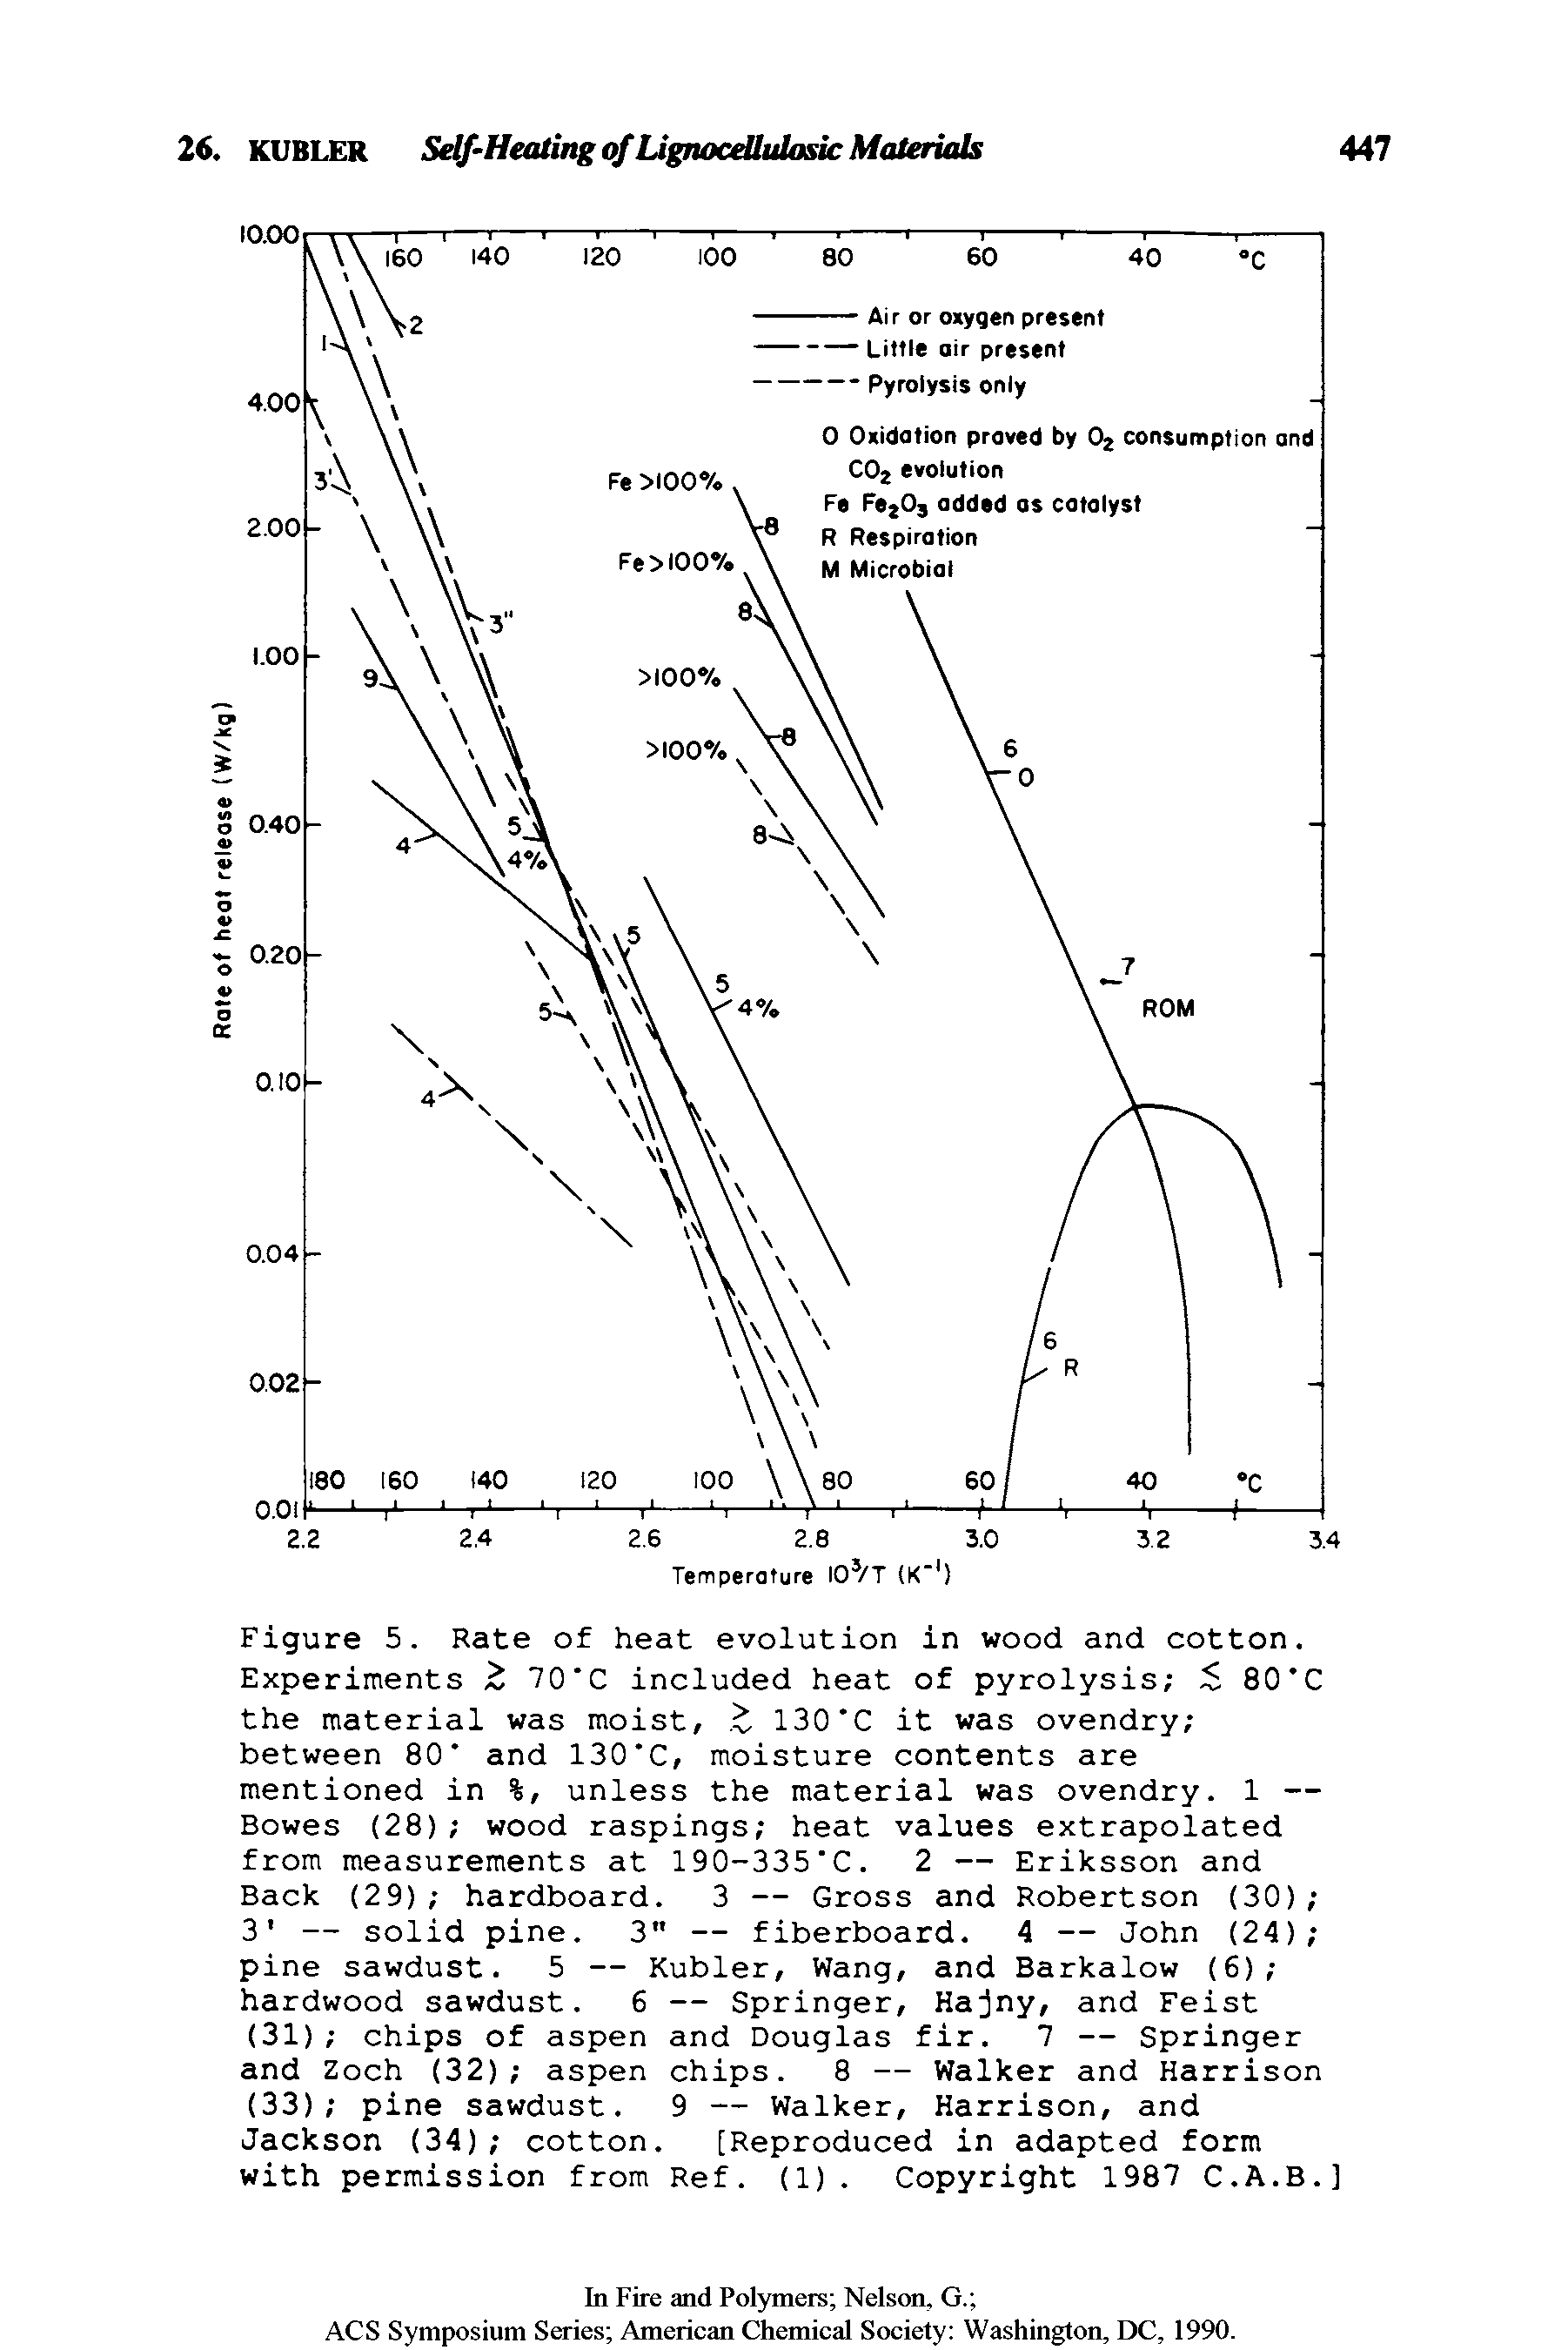 Figure 5. Rate of heat evolution in wood and cotton. Experiments 70 C included heat of pyrolysis 80 C the material was moist, 130"C it was ovendry between 80" and 130 C, moisture contents are mentioned in %, unless the material was ovendry. 1 — Bowes (28) wood raspings heat values extrapolated from measurements at 190-335 C. 2 — Eriksson and...